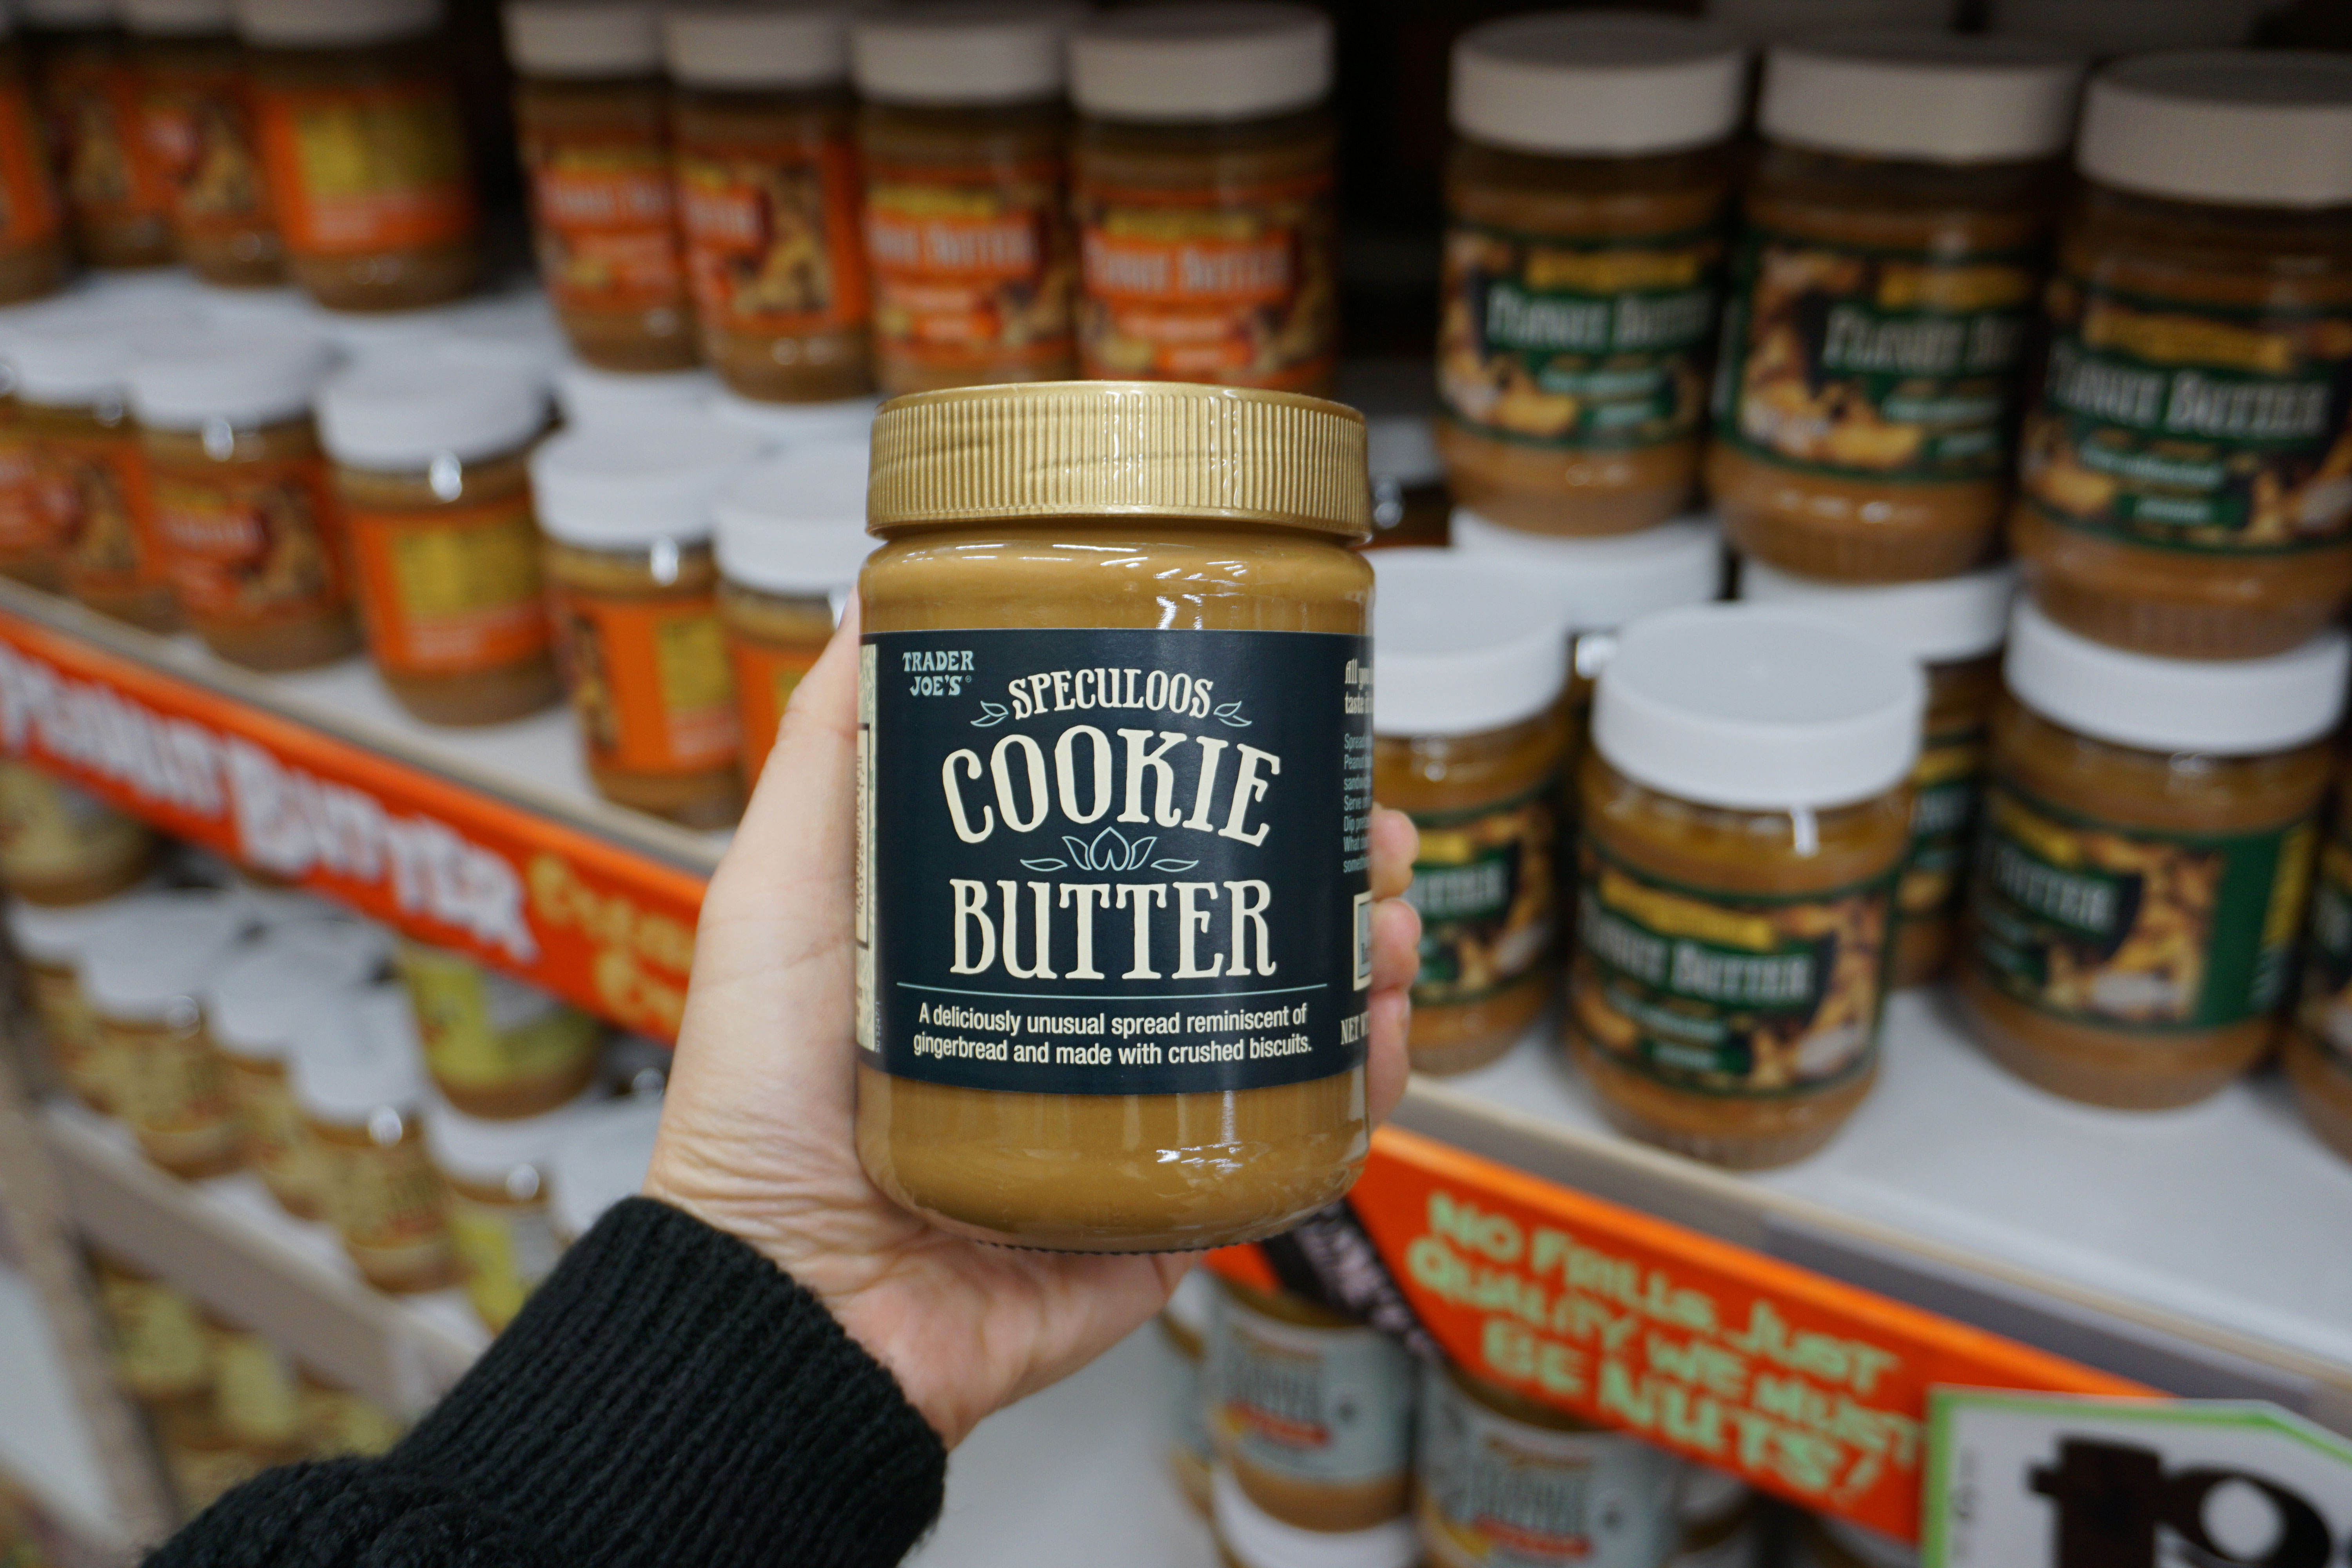 Speculoos Cookie Butter, Our Products